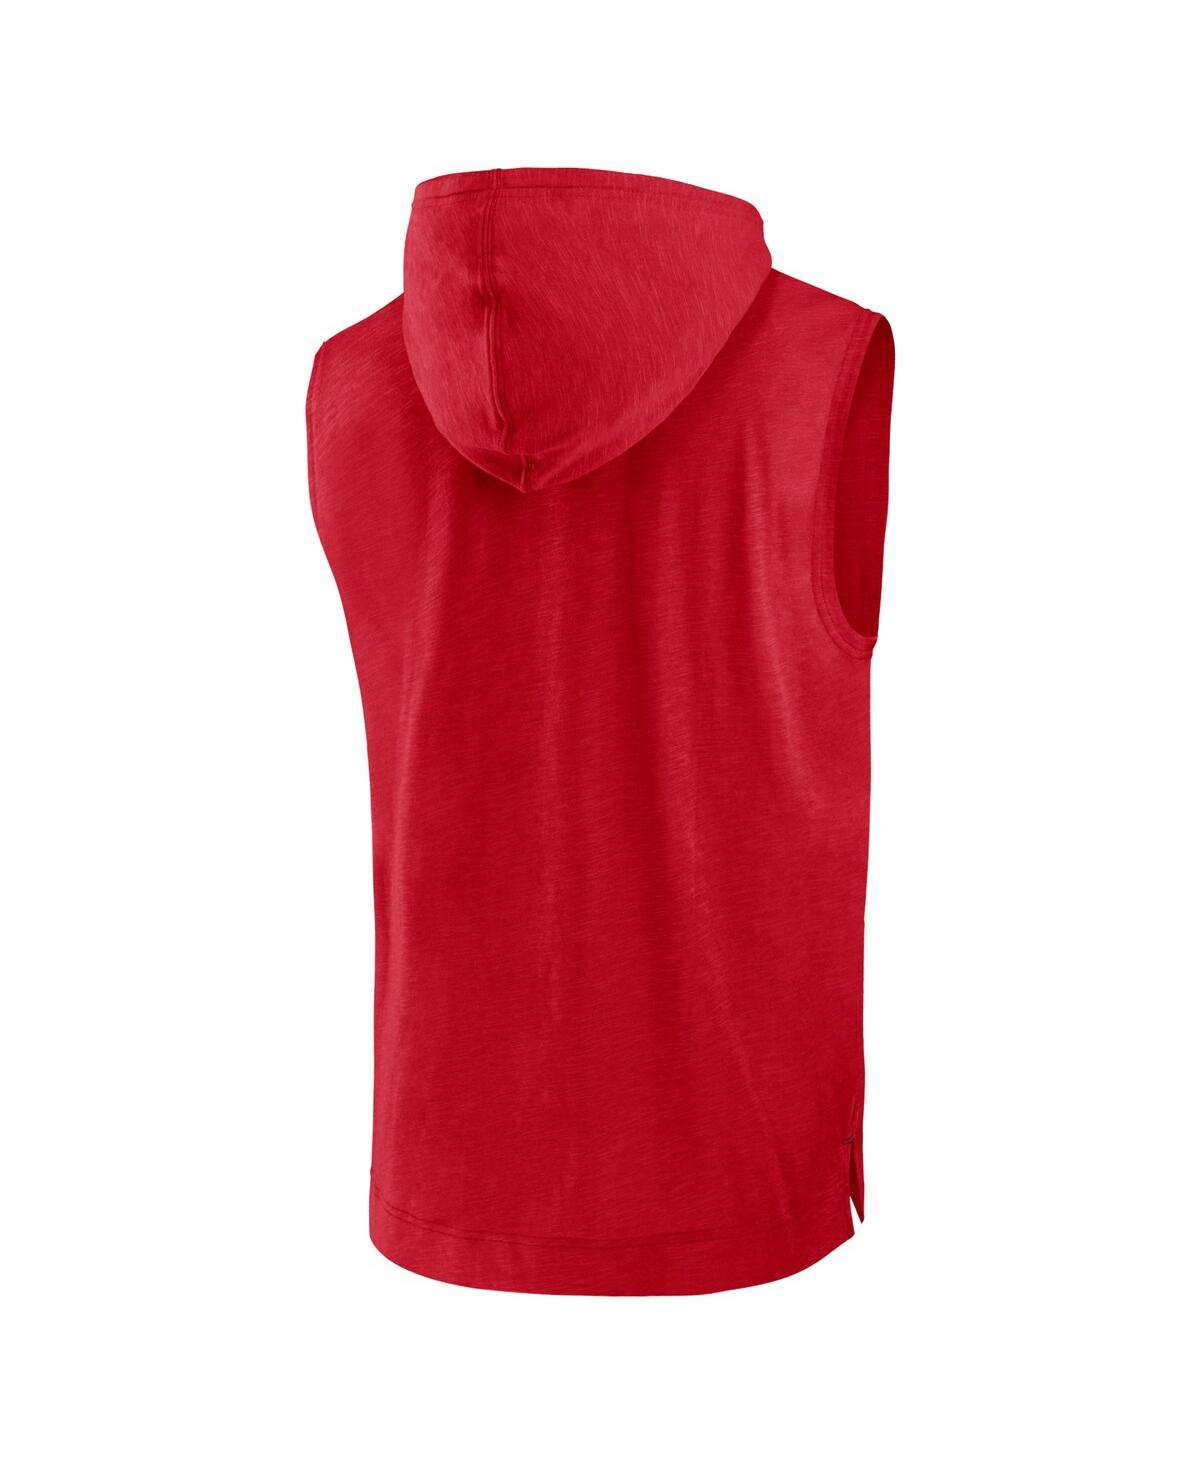 Shop Nike Men's  Red St. Louis Cardinals Athletic Sleeveless Hooded T-shirt